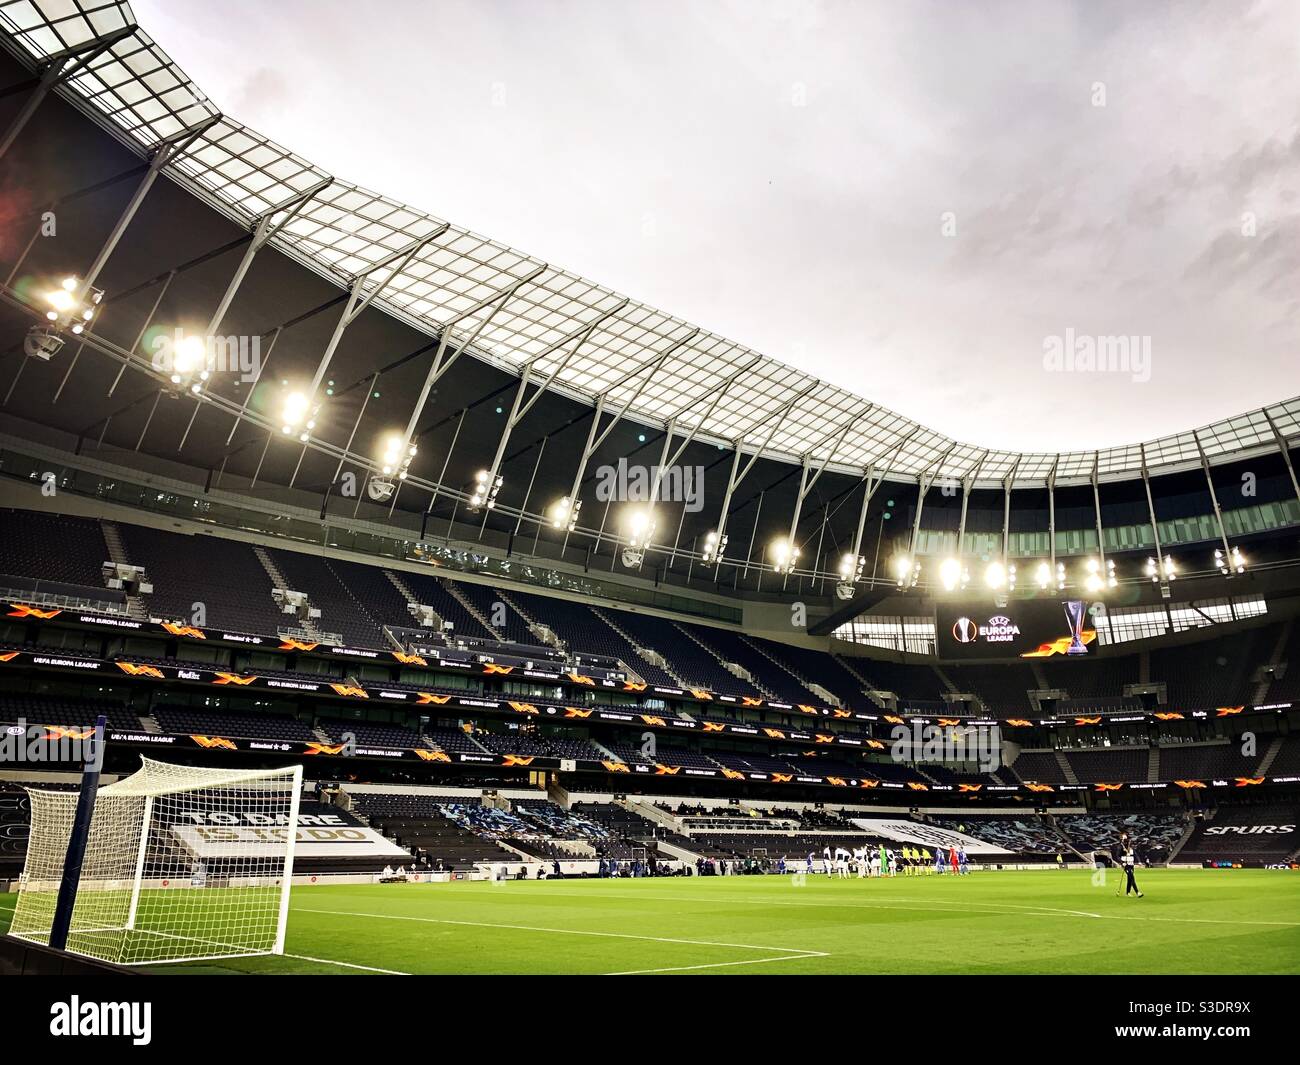 A general view showing the stadium, home to Tottenham Hotspur football club in London. Stock Photo